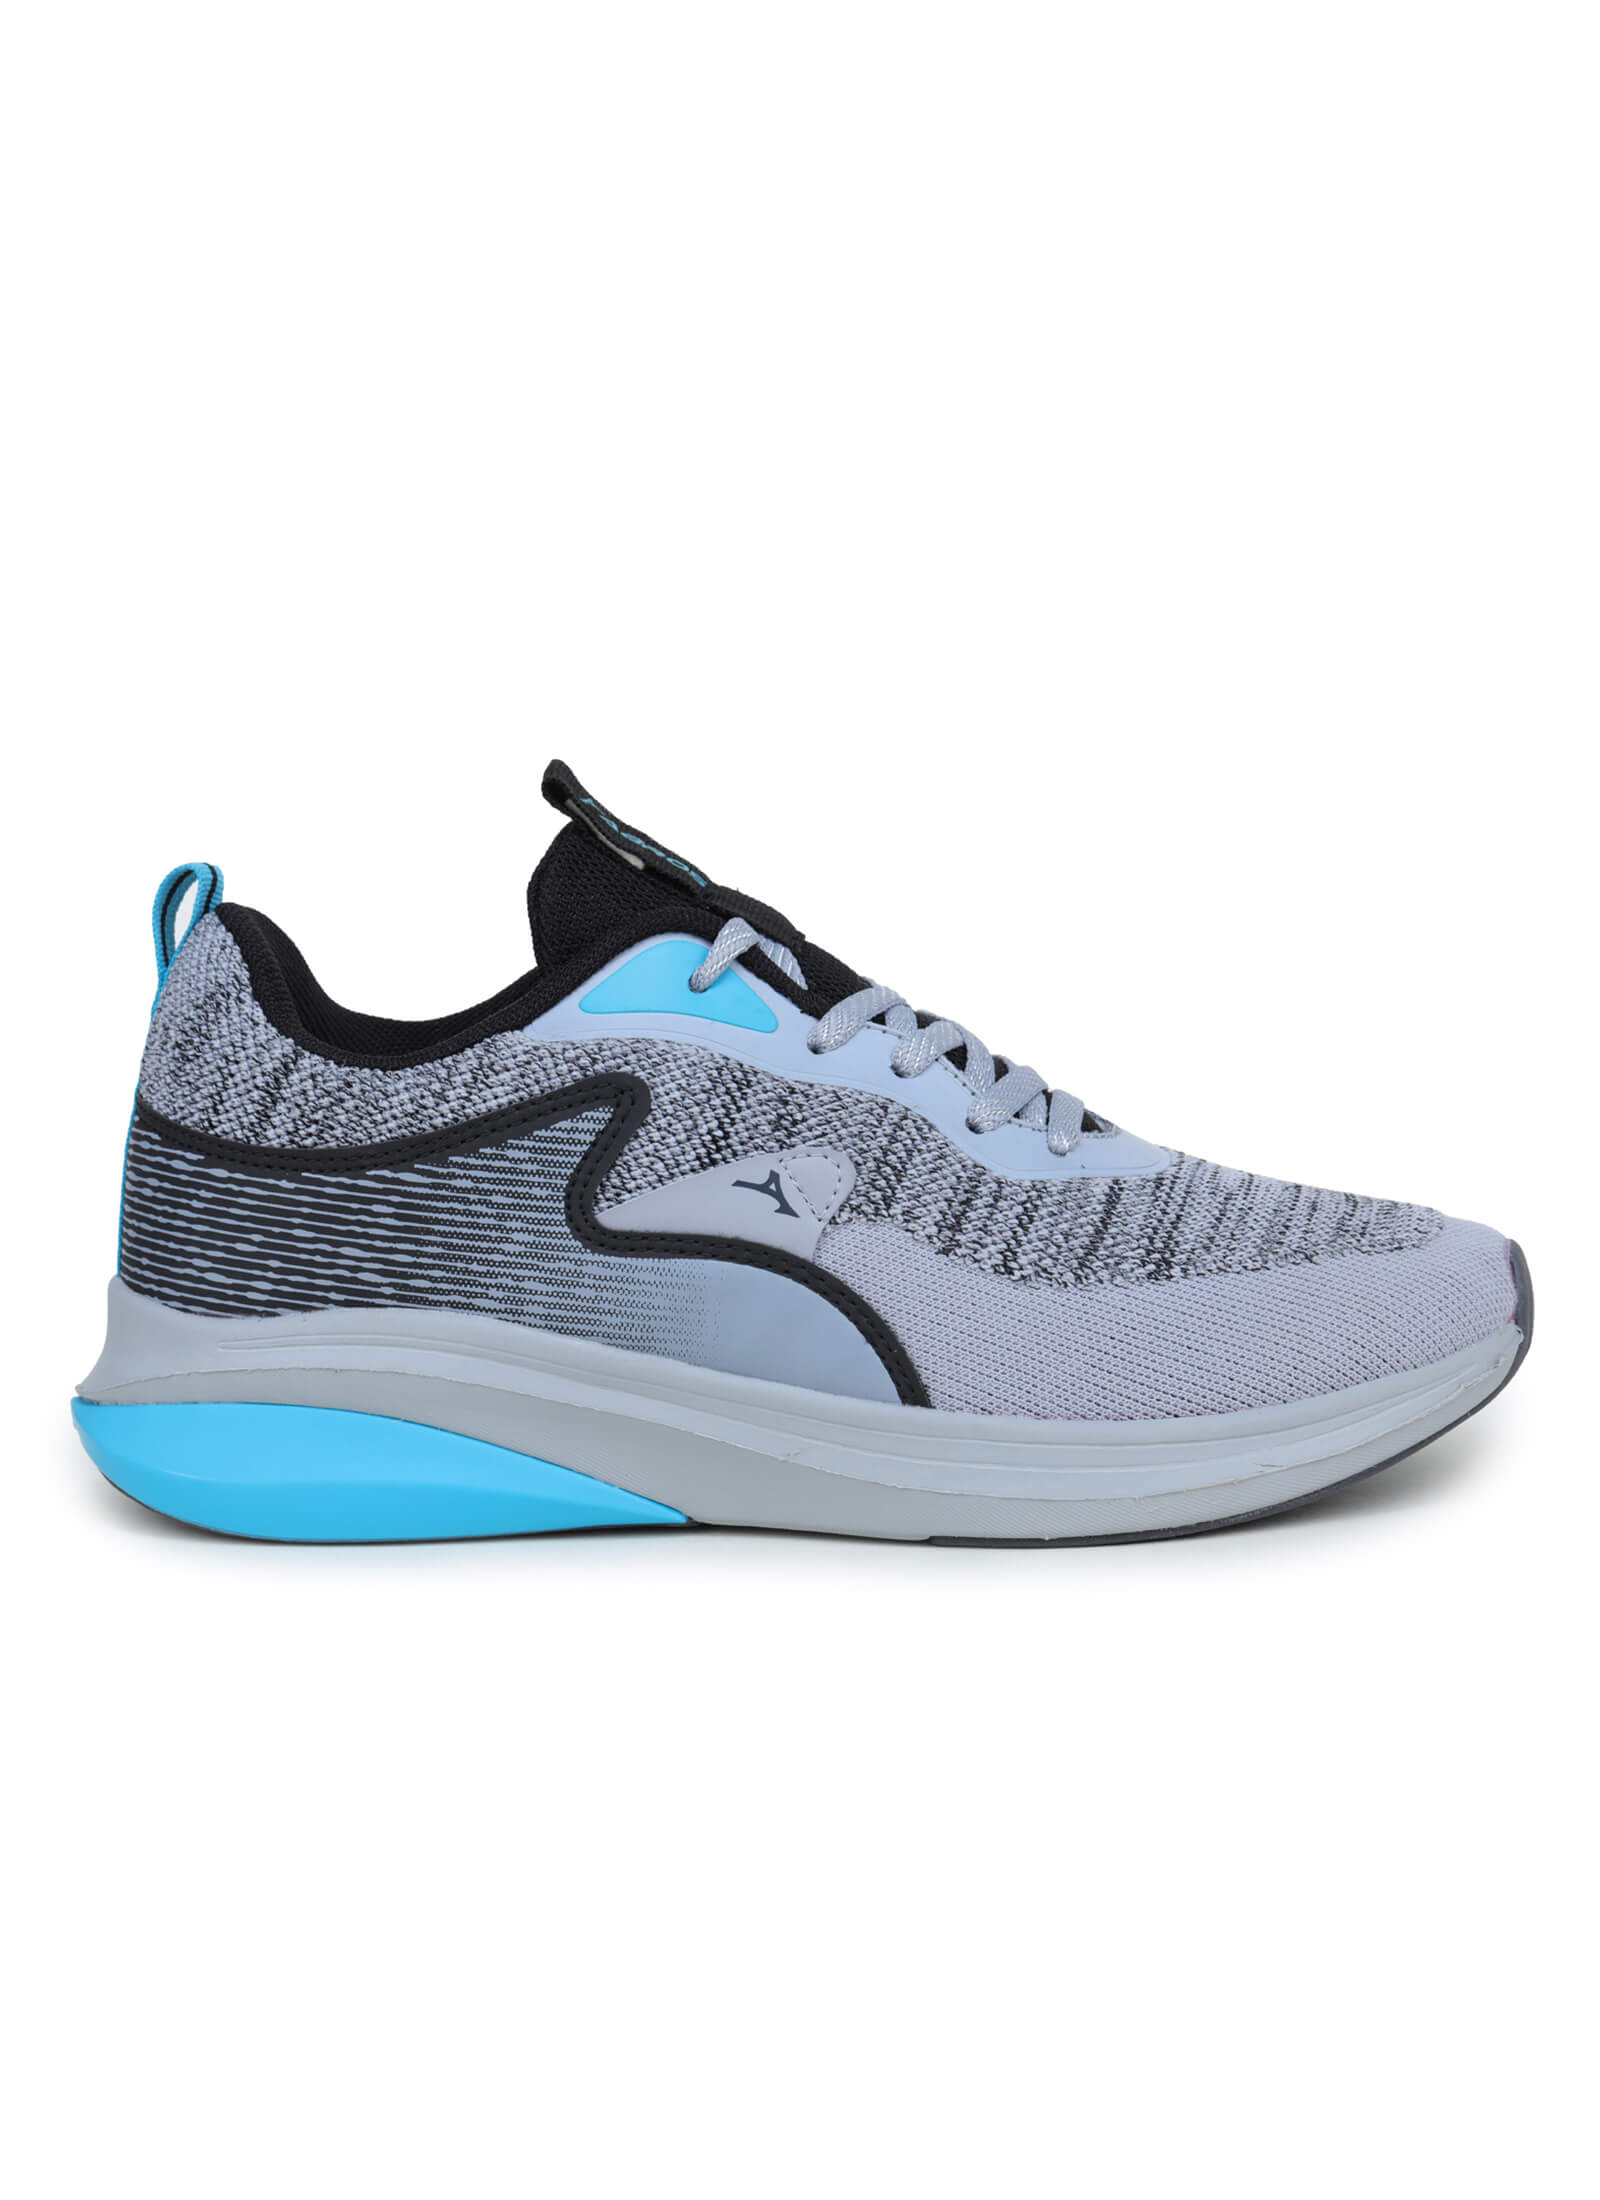 Bairstow-4 Anti-Skid Sports Shoes For Men